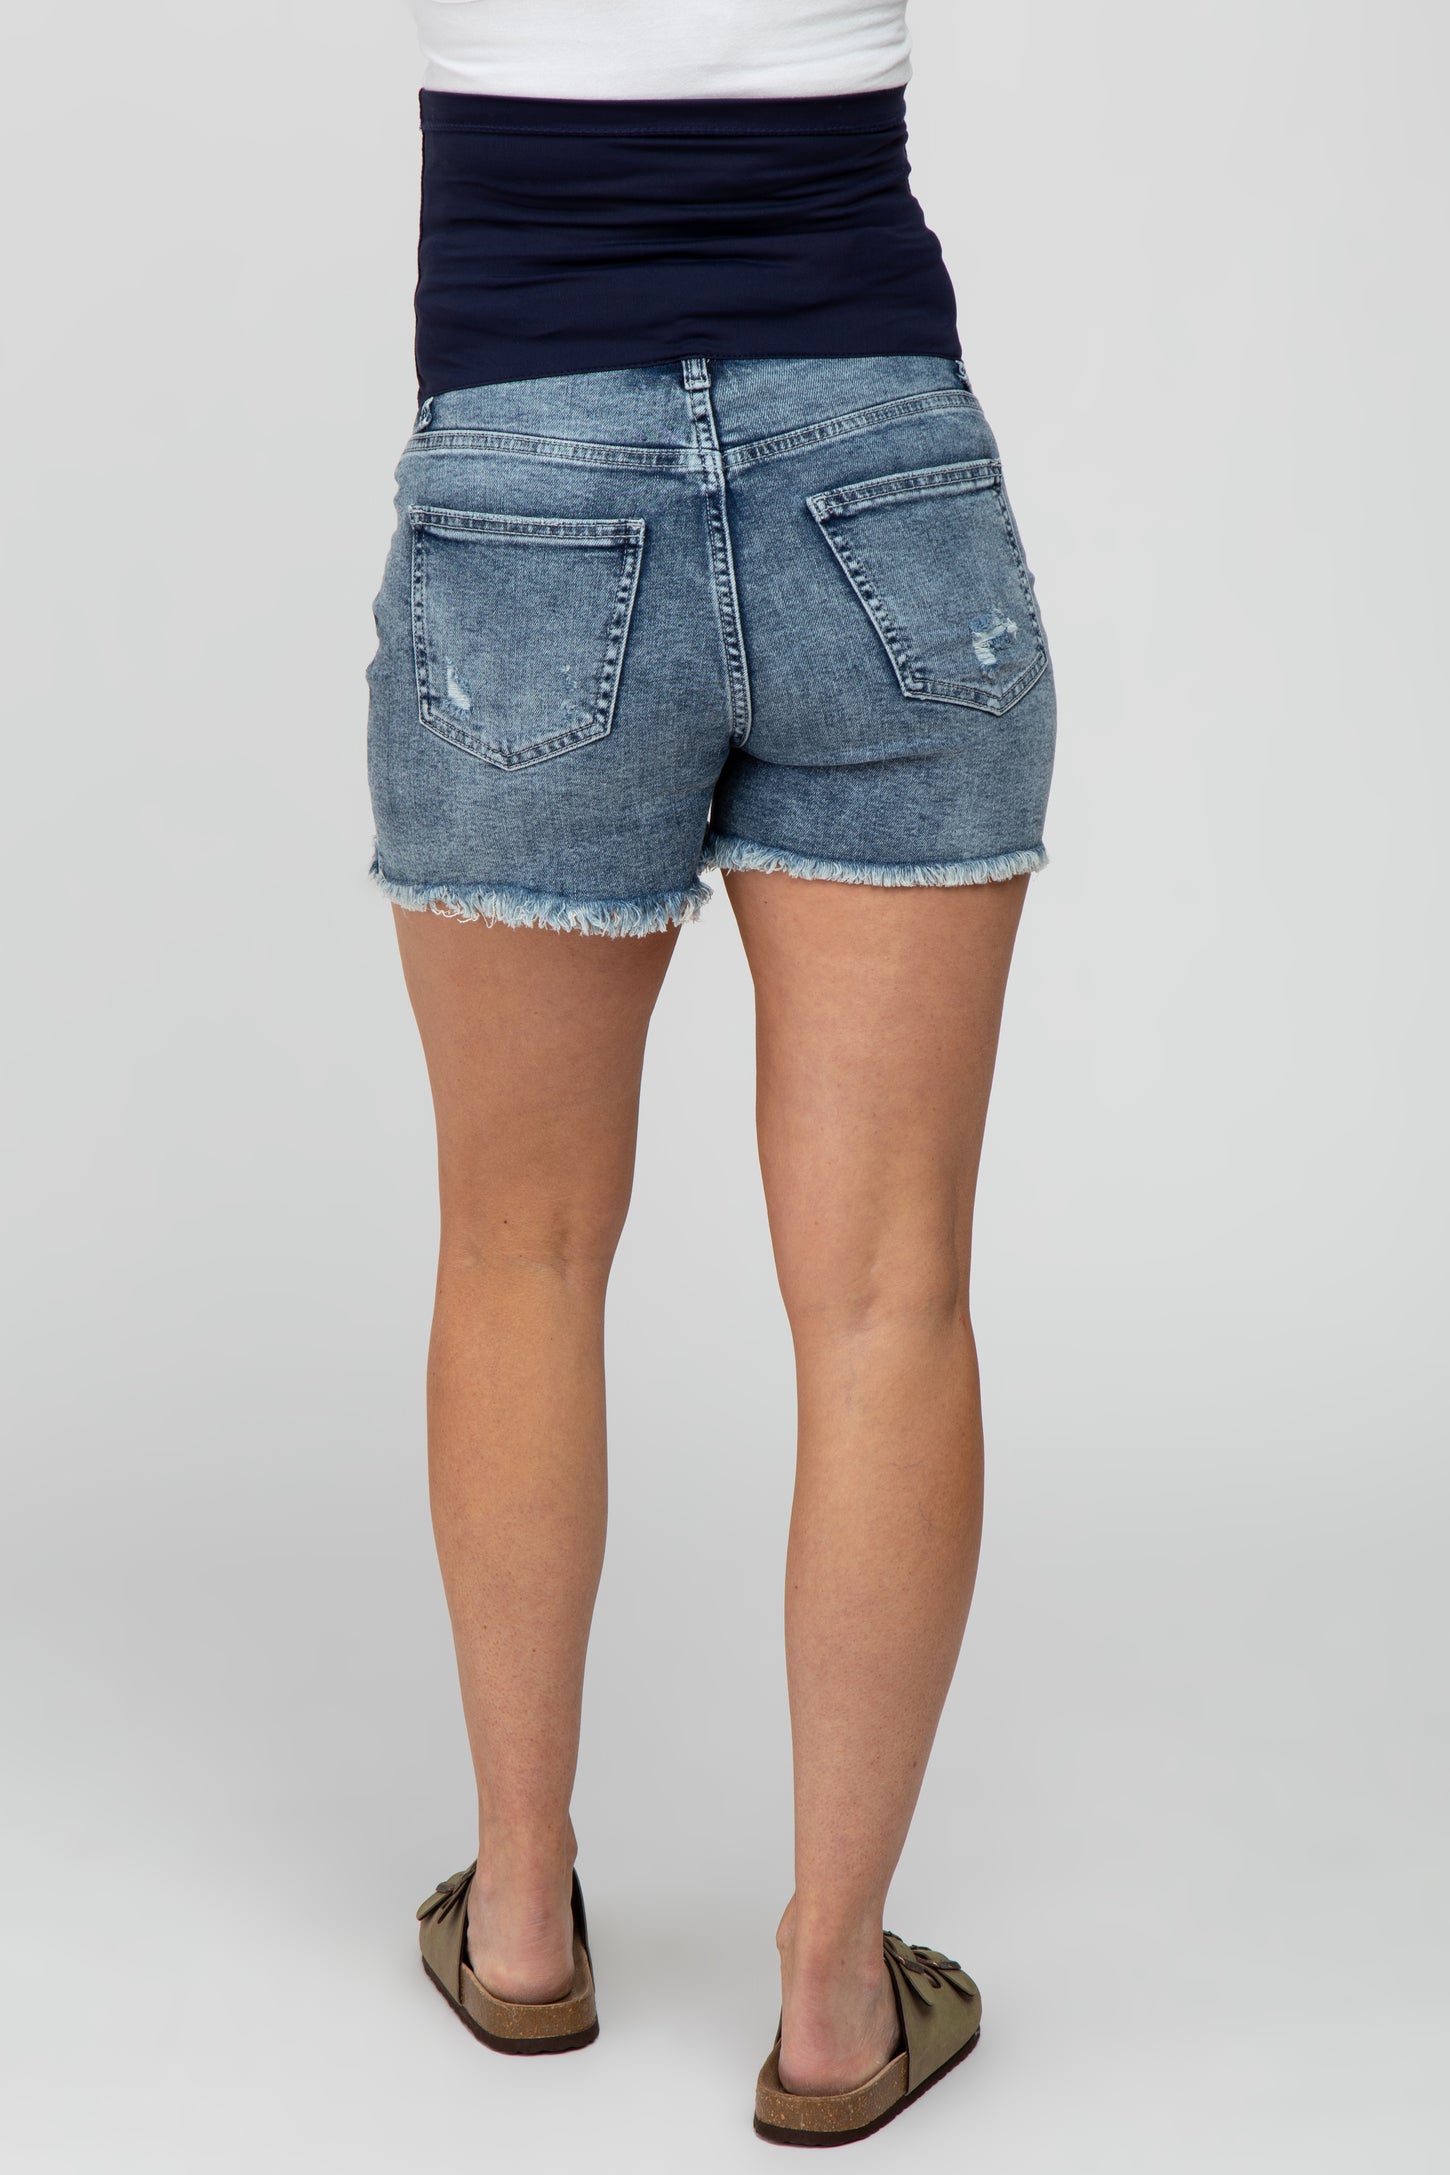 Blue Washed Slightly Distressed Maternity Jean Shorts